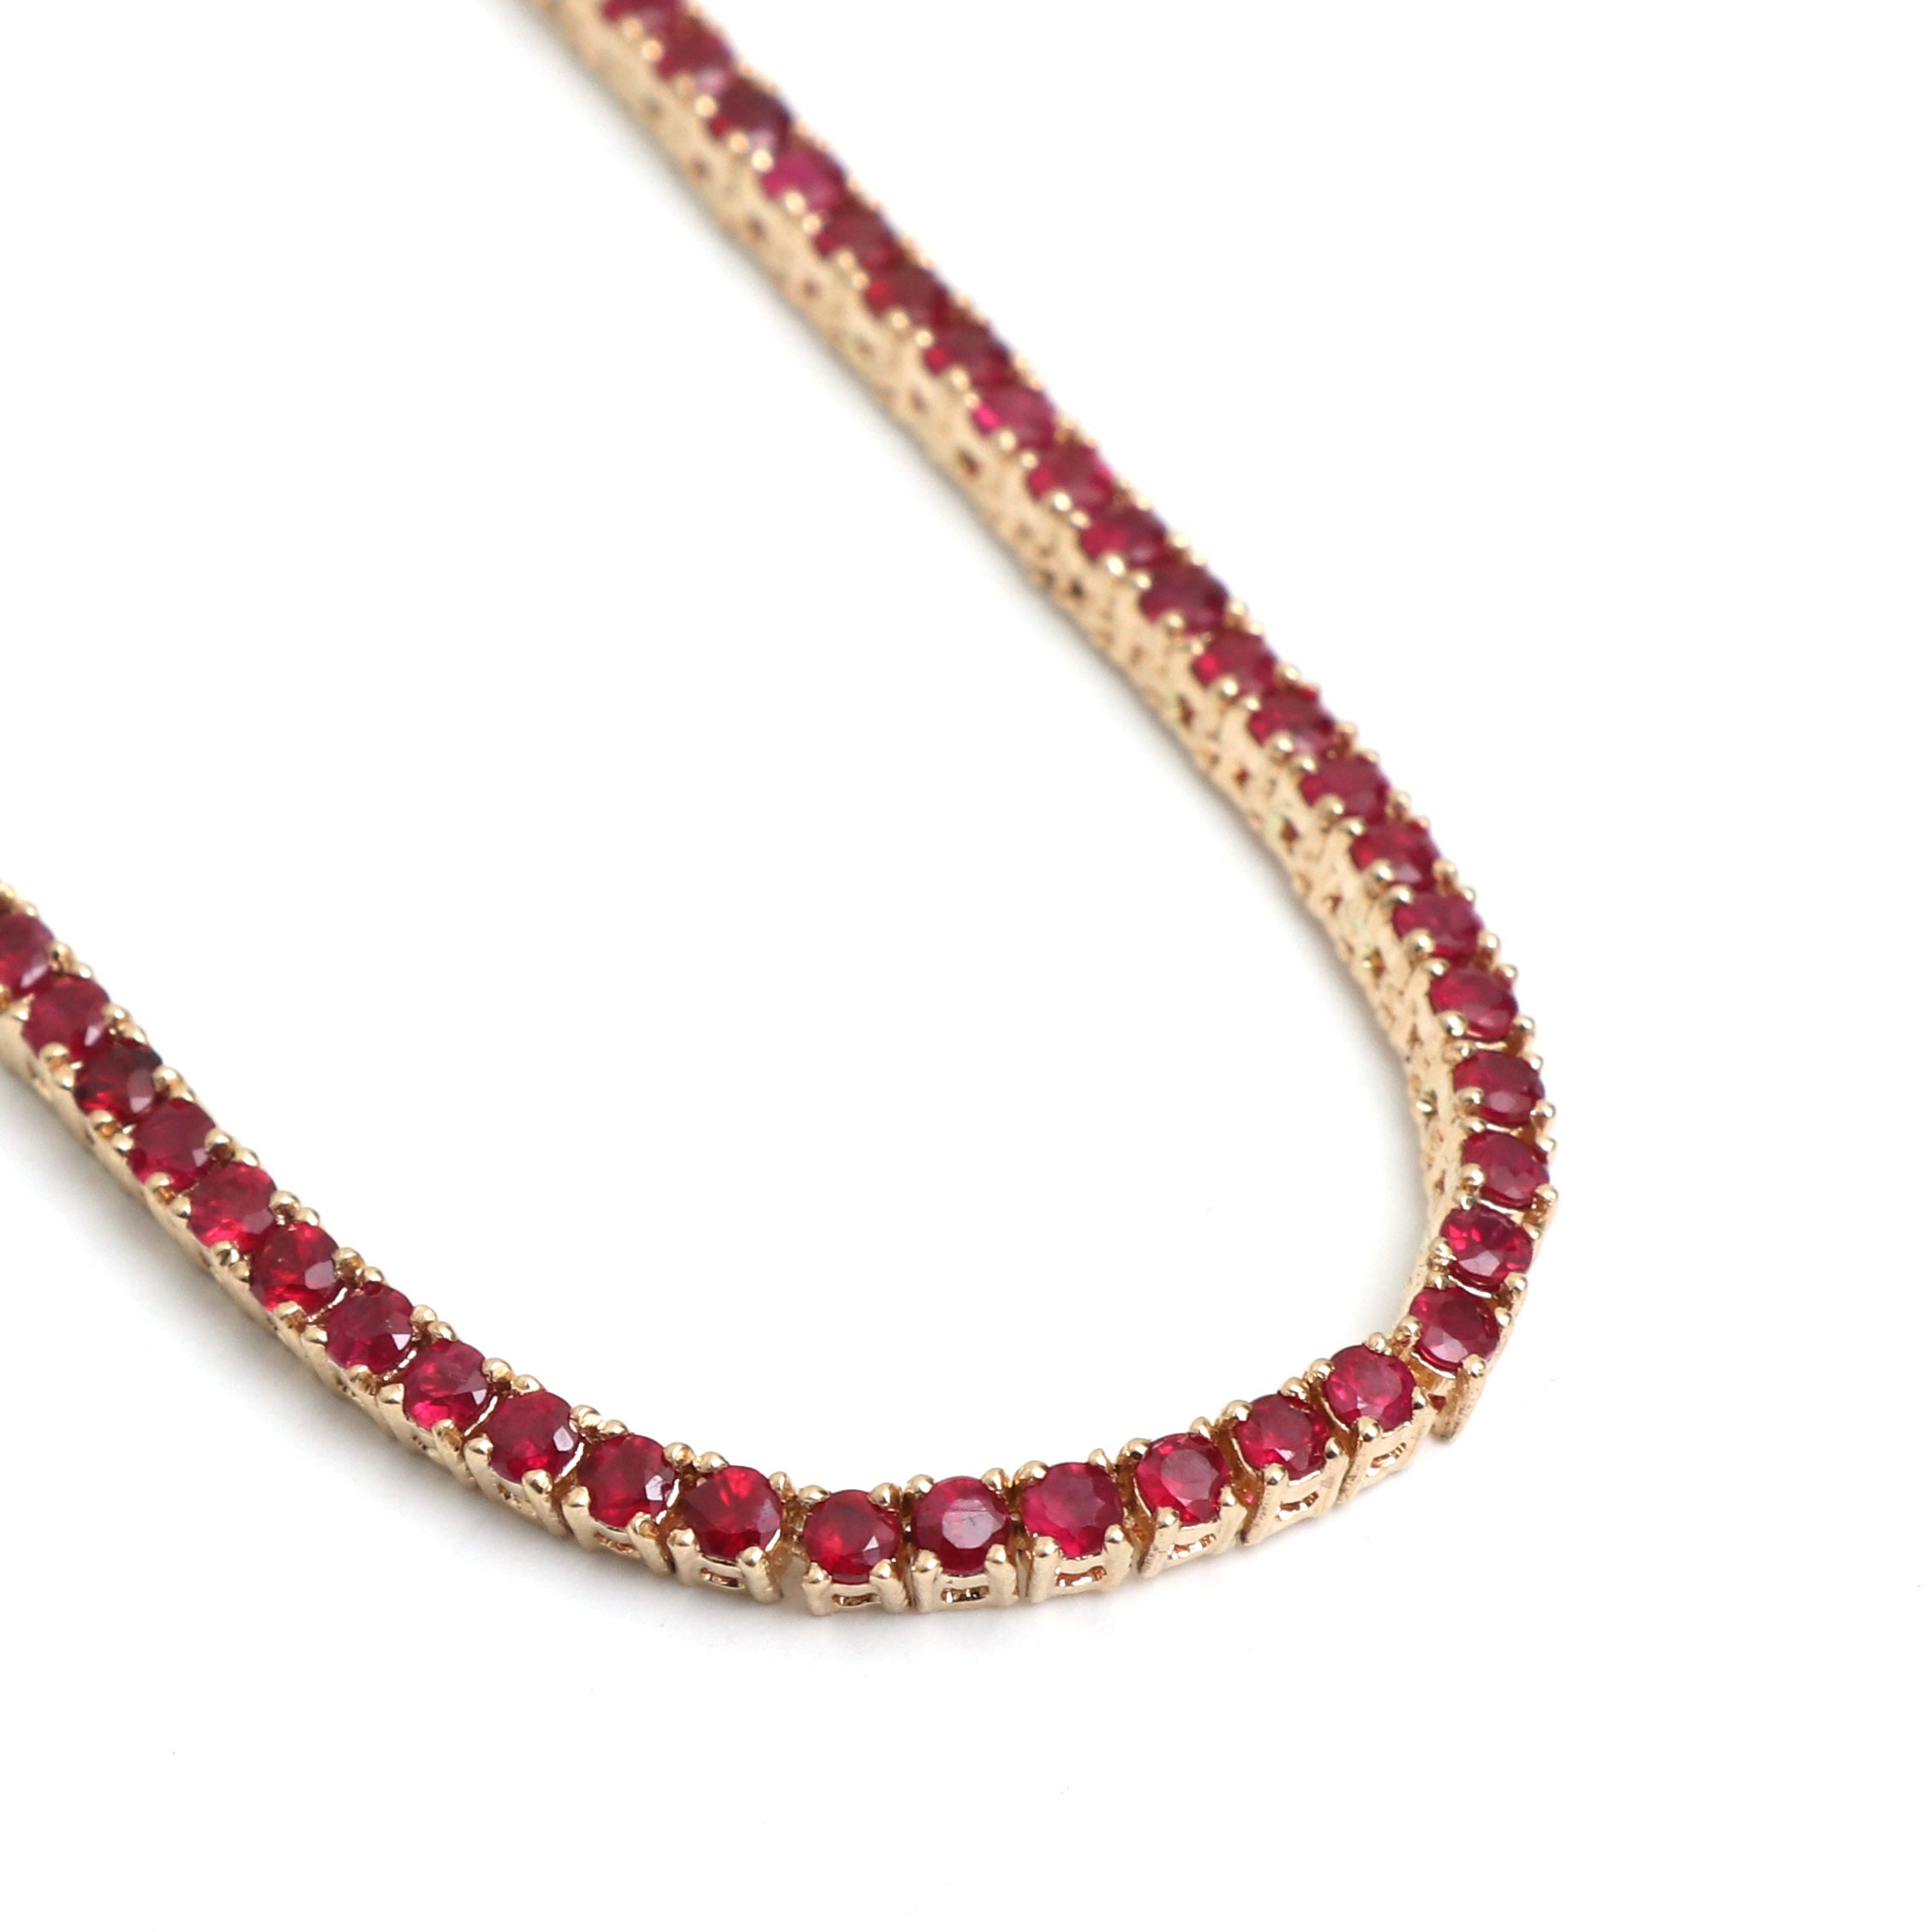 Buy Round Ruby Tennis Necklace in Silver Ruby Necklace, Tennis Necklace,  Ruby Round Necklace, July Birthstone Necklace, Brithday Gift for Her Online  in India - Etsy